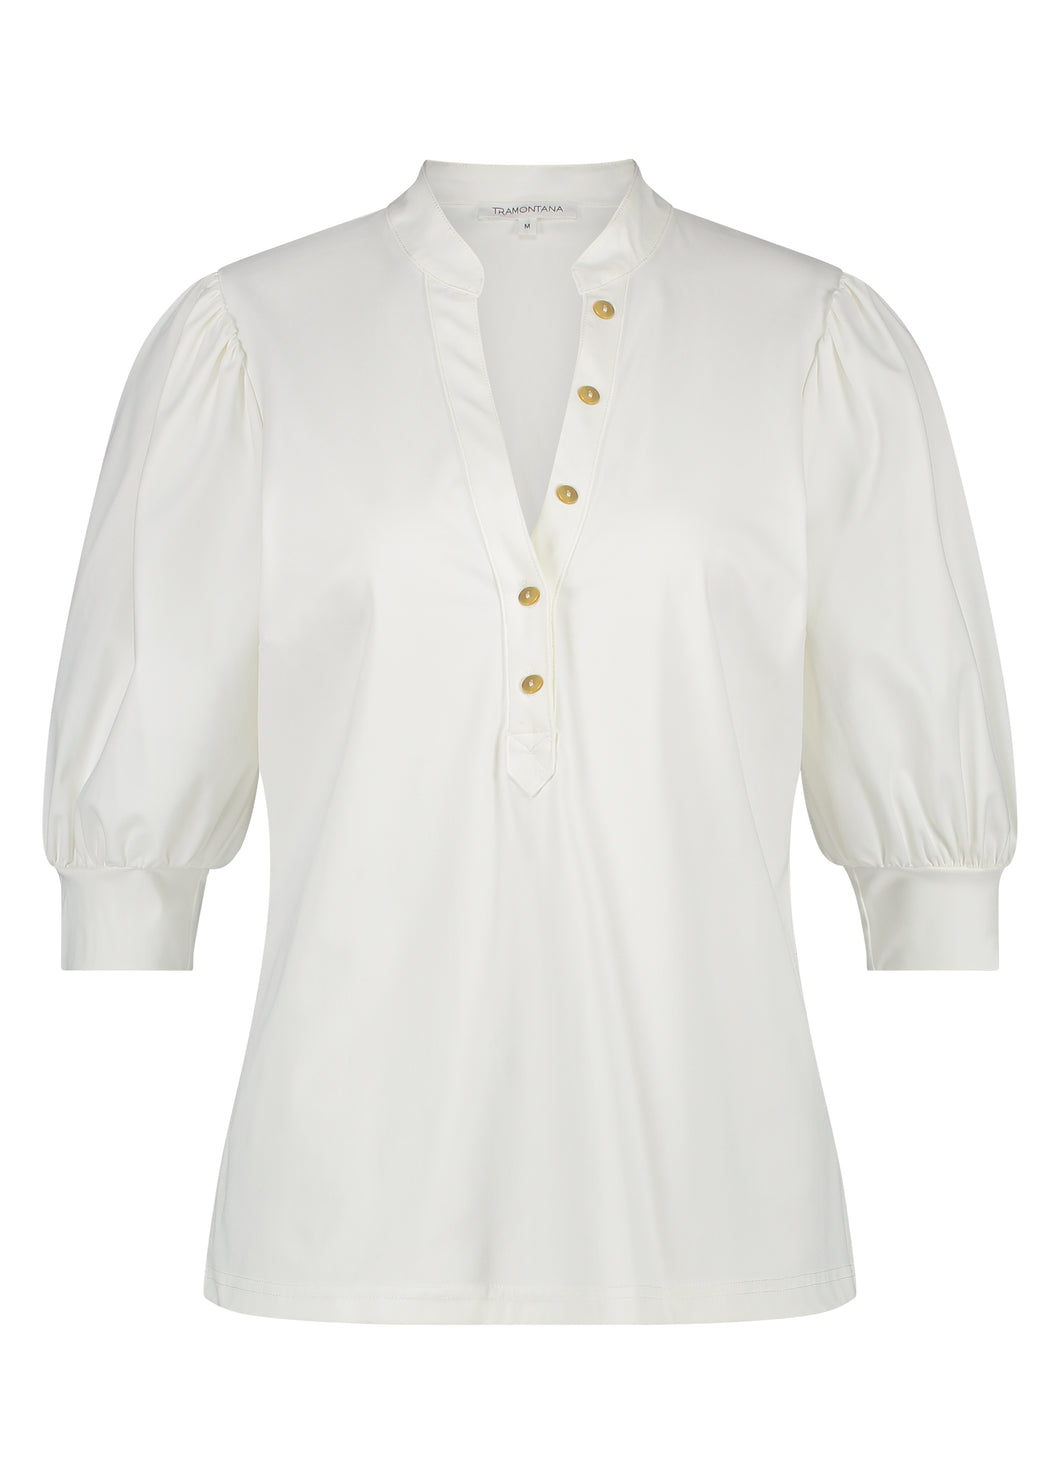 TRAMONTANA TOP TRAVEL BUTTON S/S off white